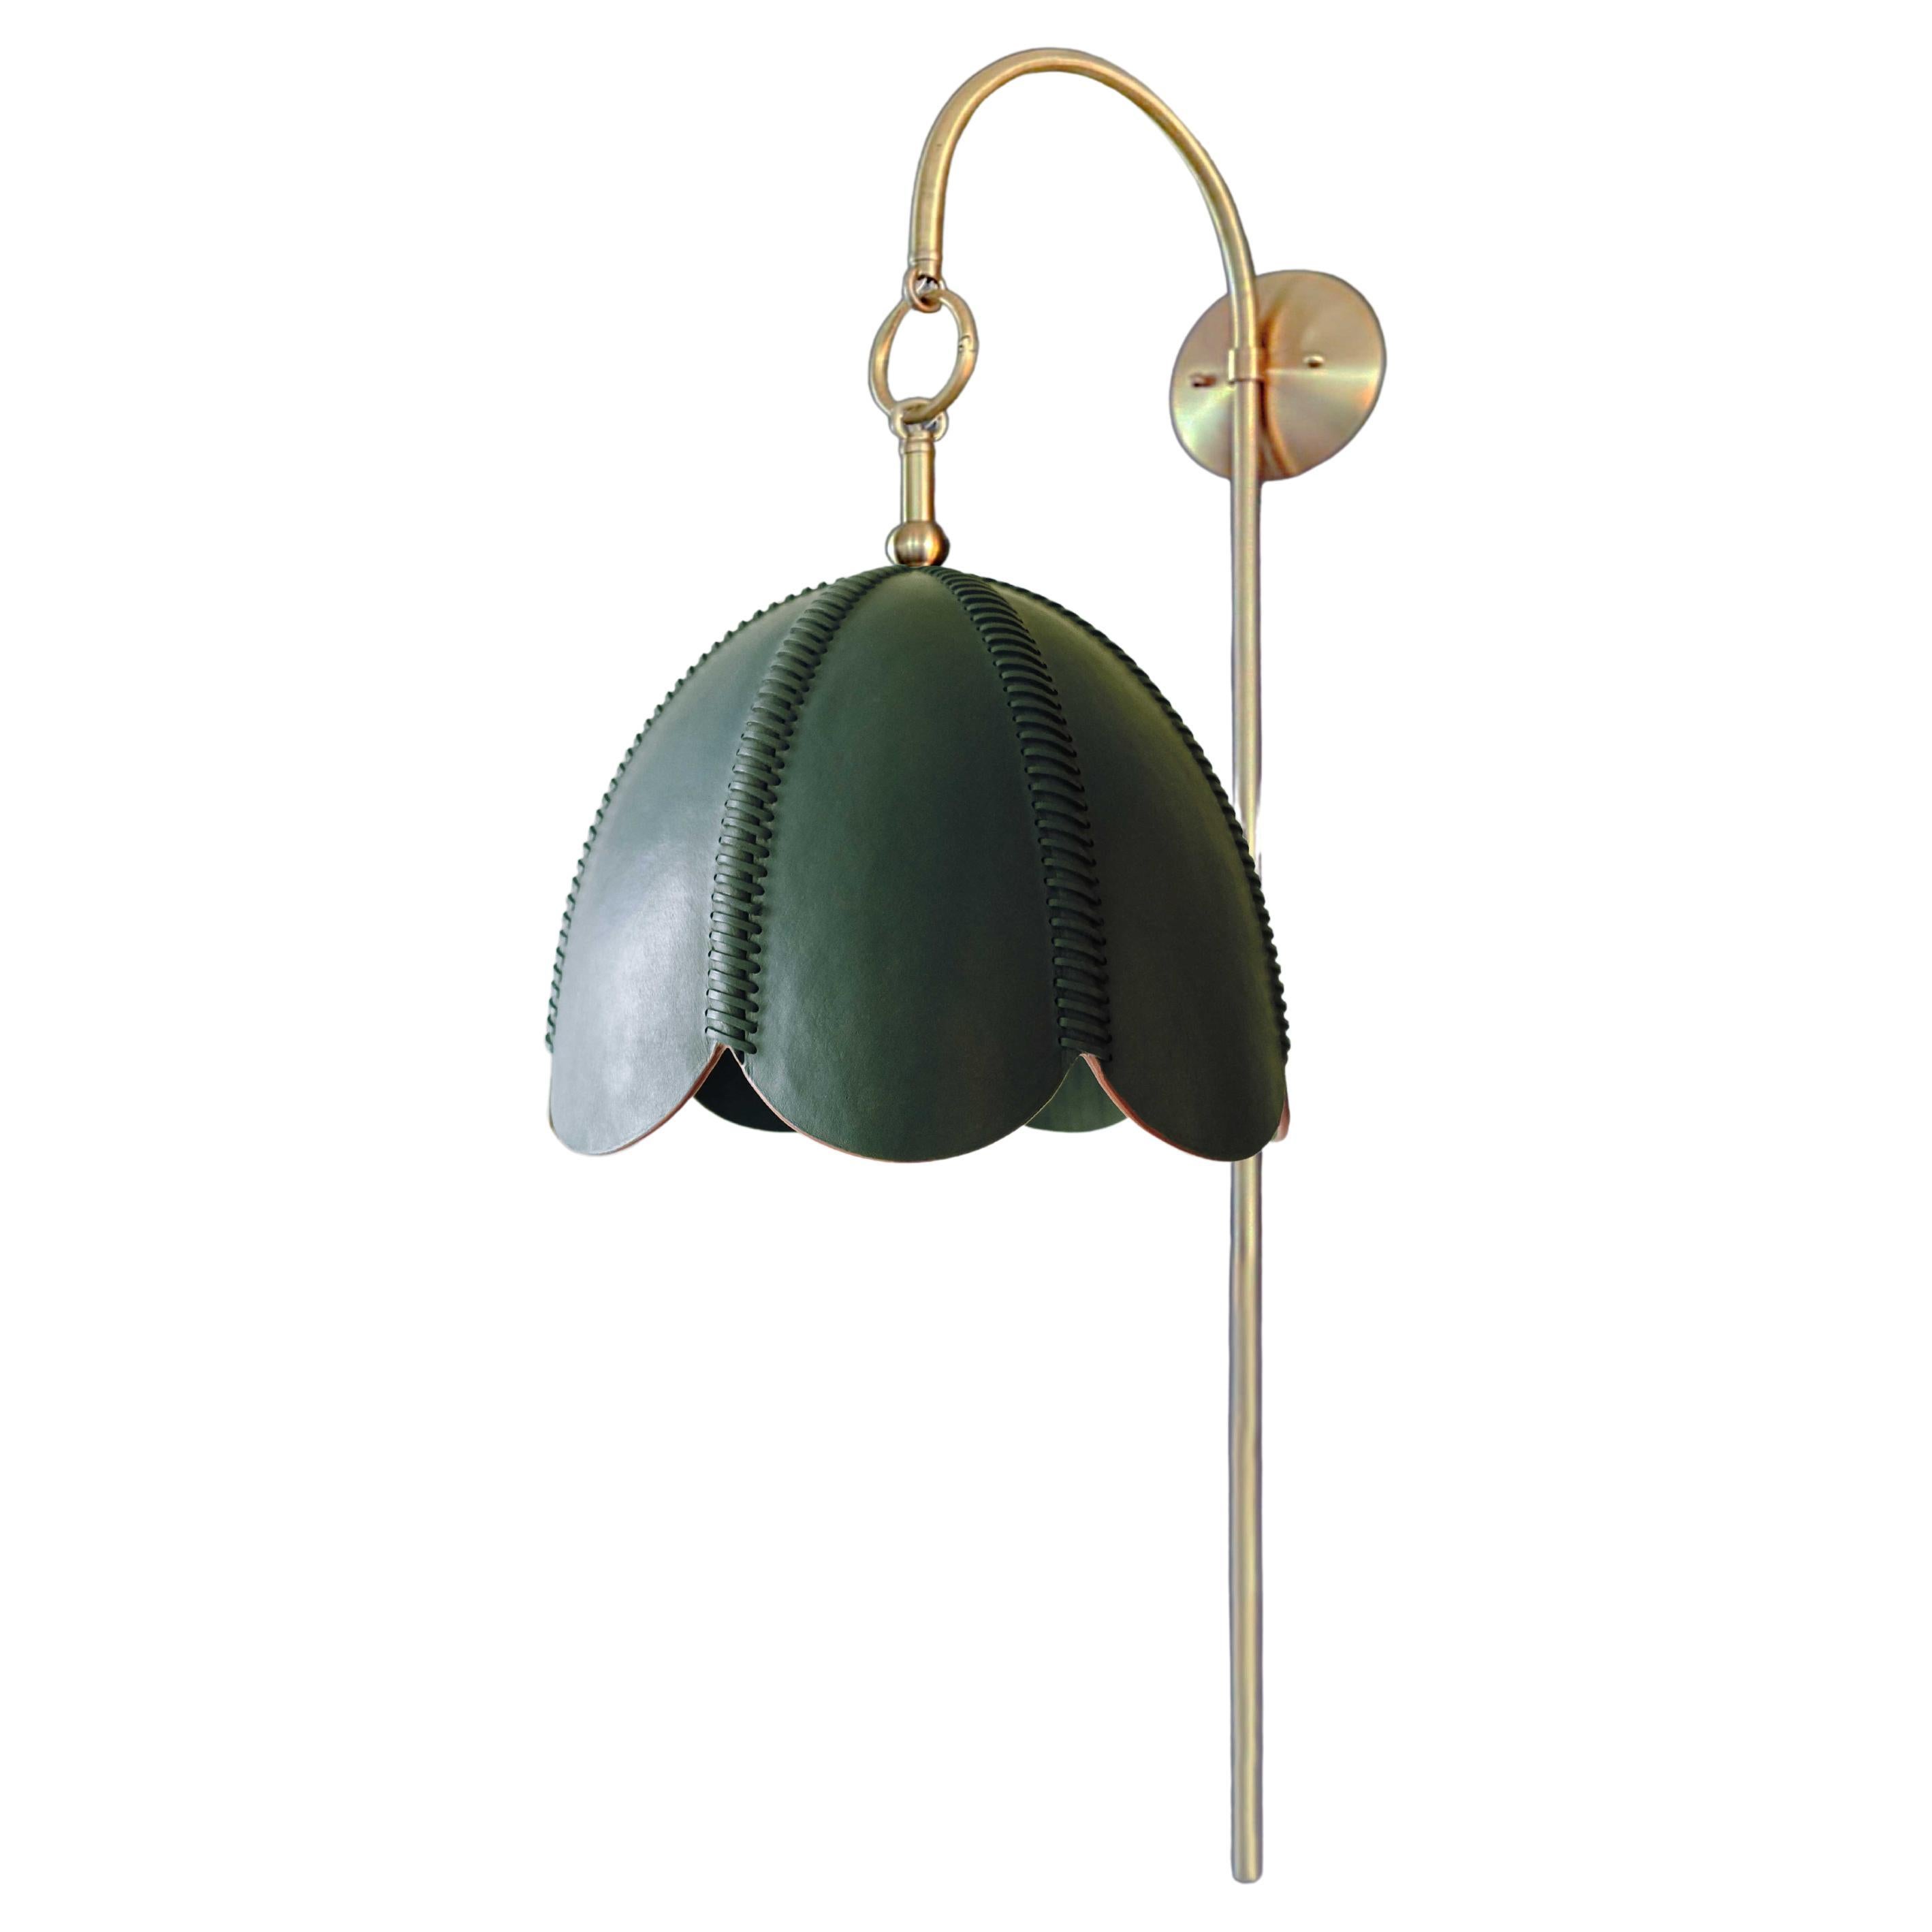 Leather Arched Sconce, Emerald Green, Small, Doma, Saddle Lamp Collection For Sale